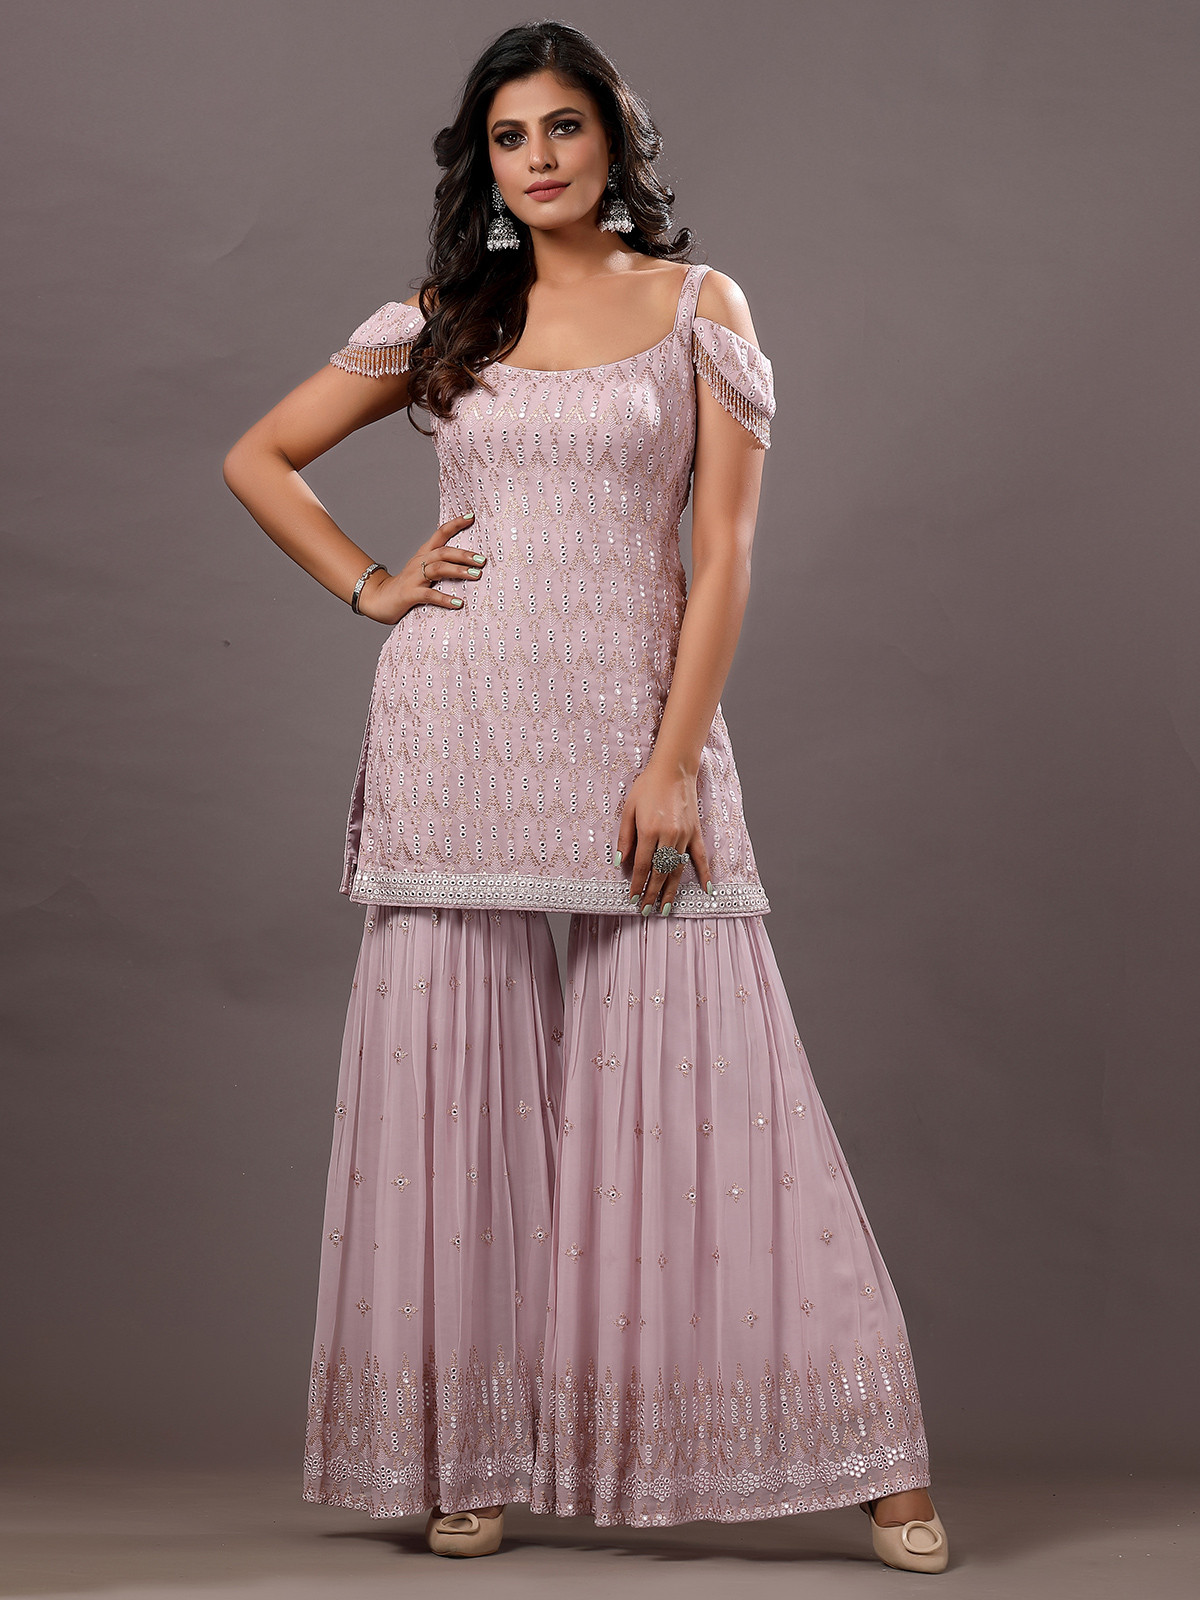 Pastel sharara eid outfits for women